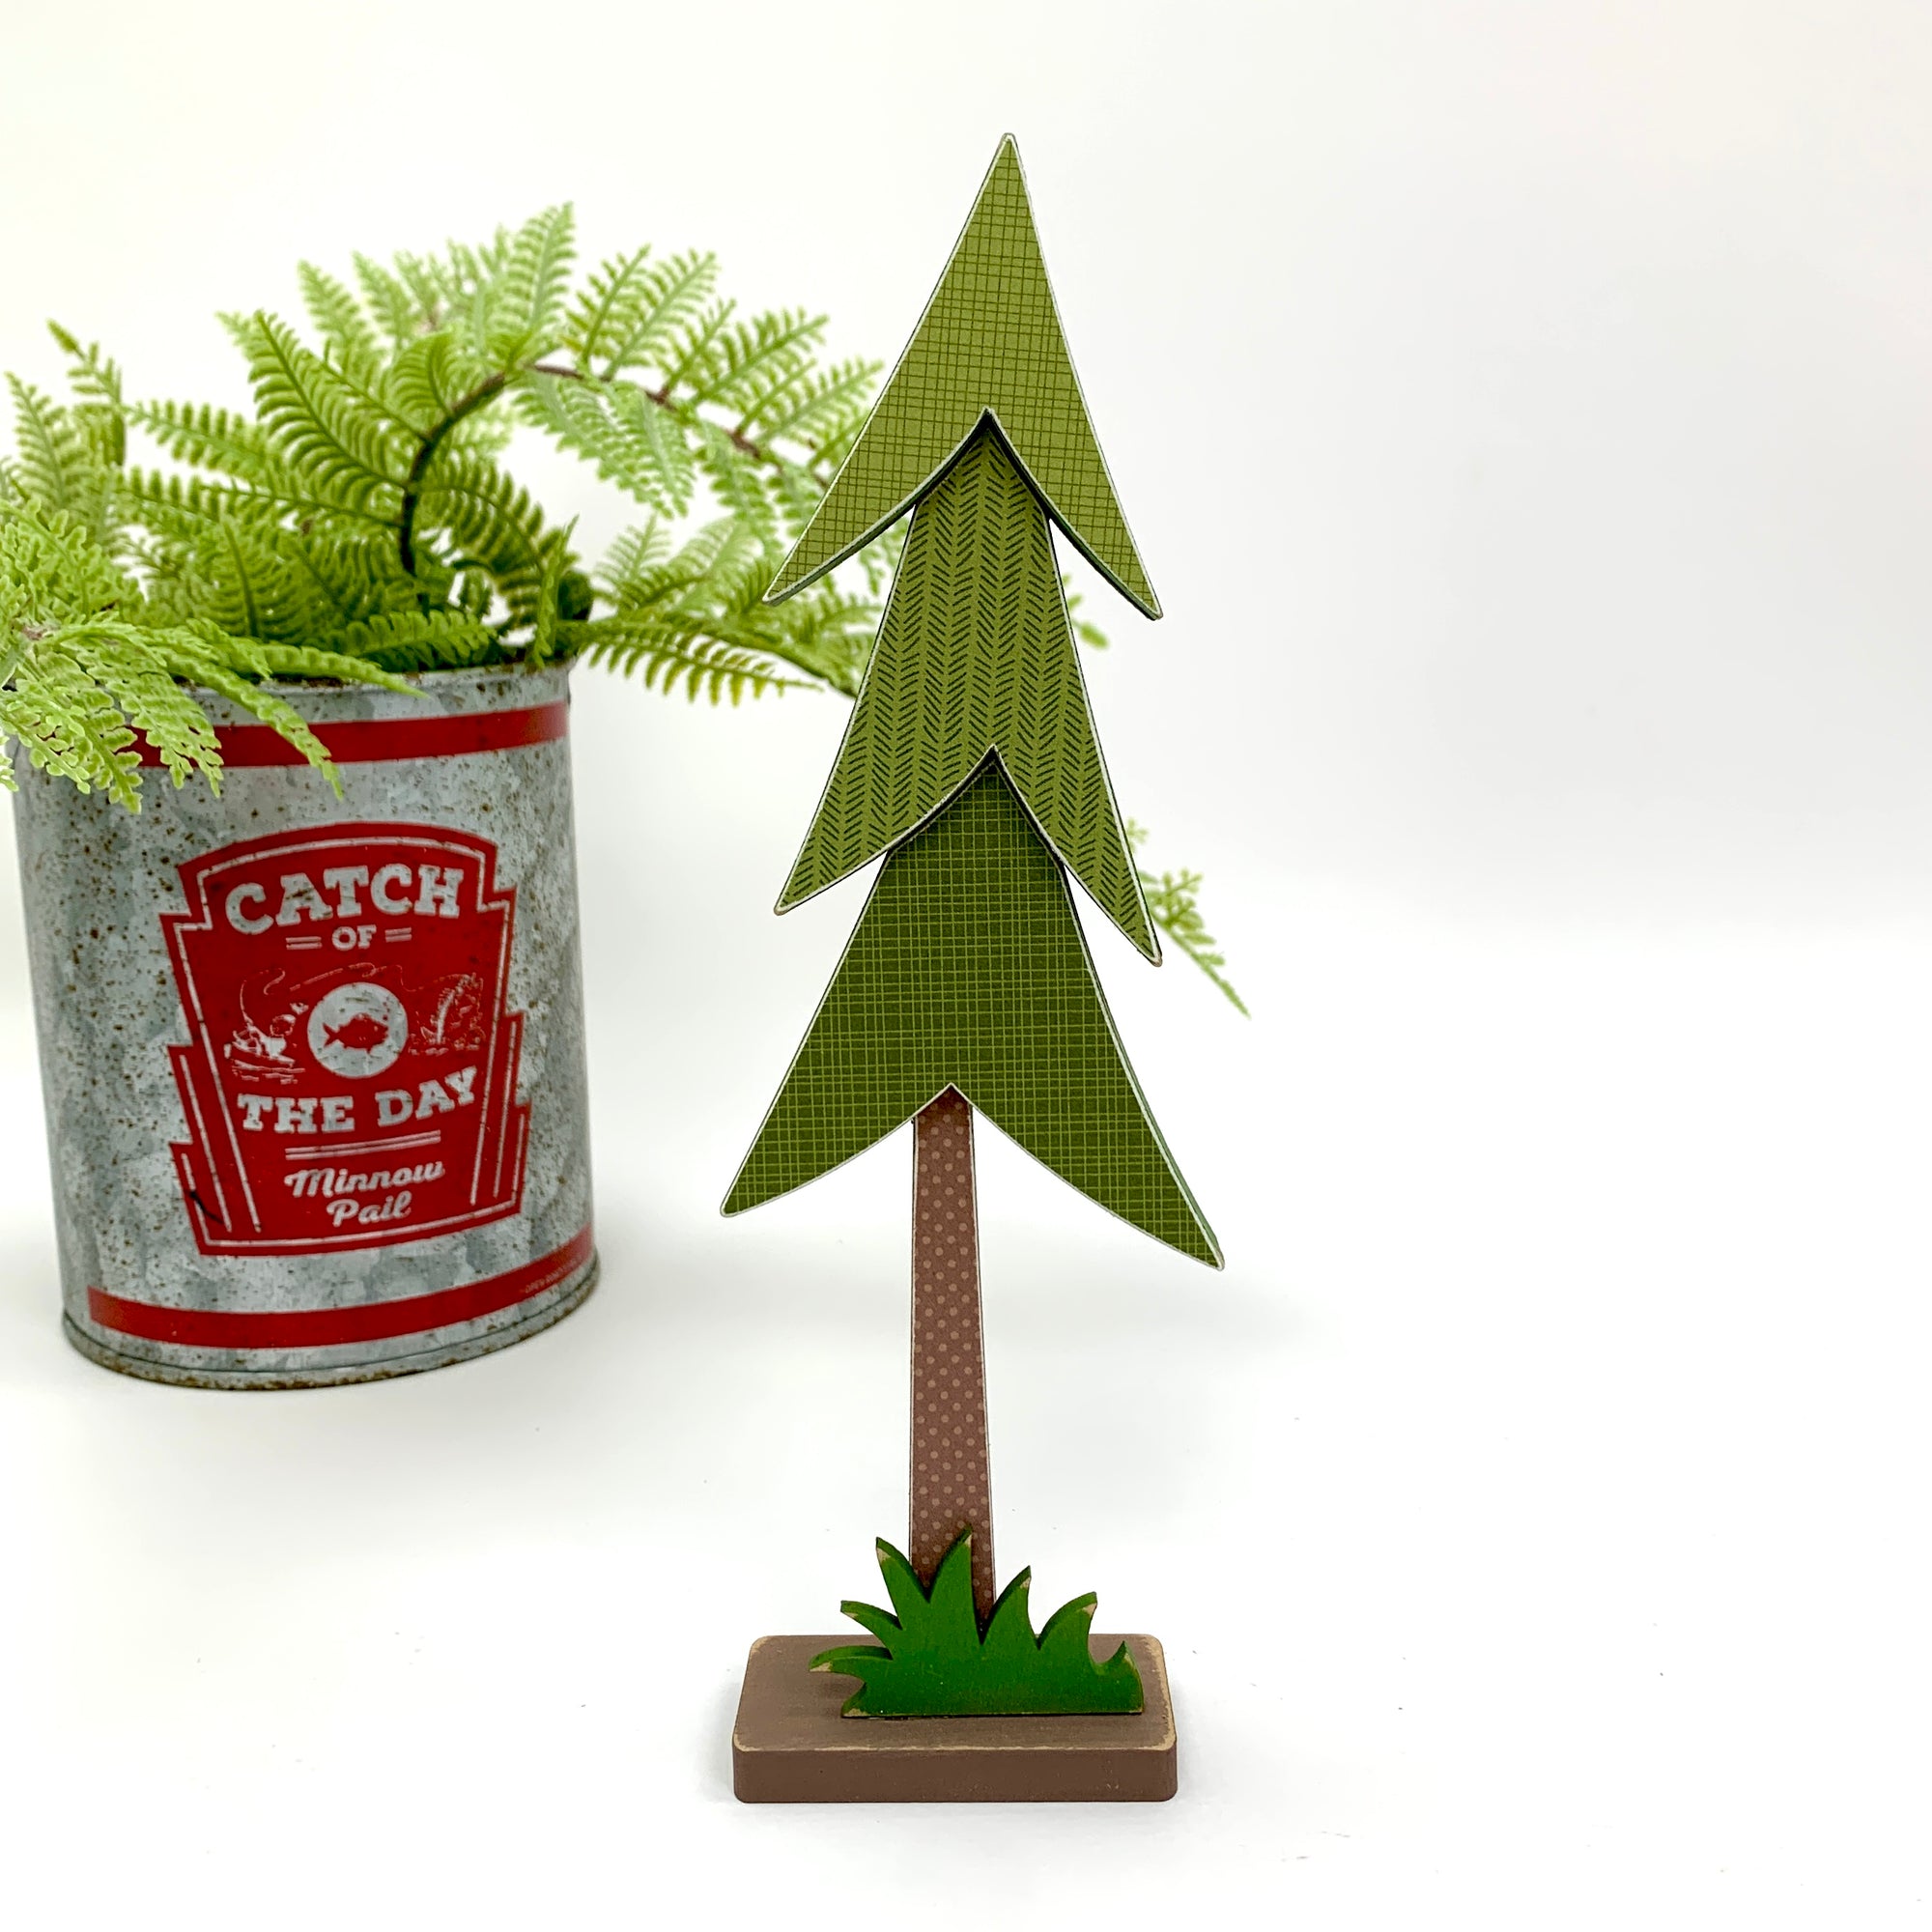 Pine tree wood decor craft kit for tiered tray decorations